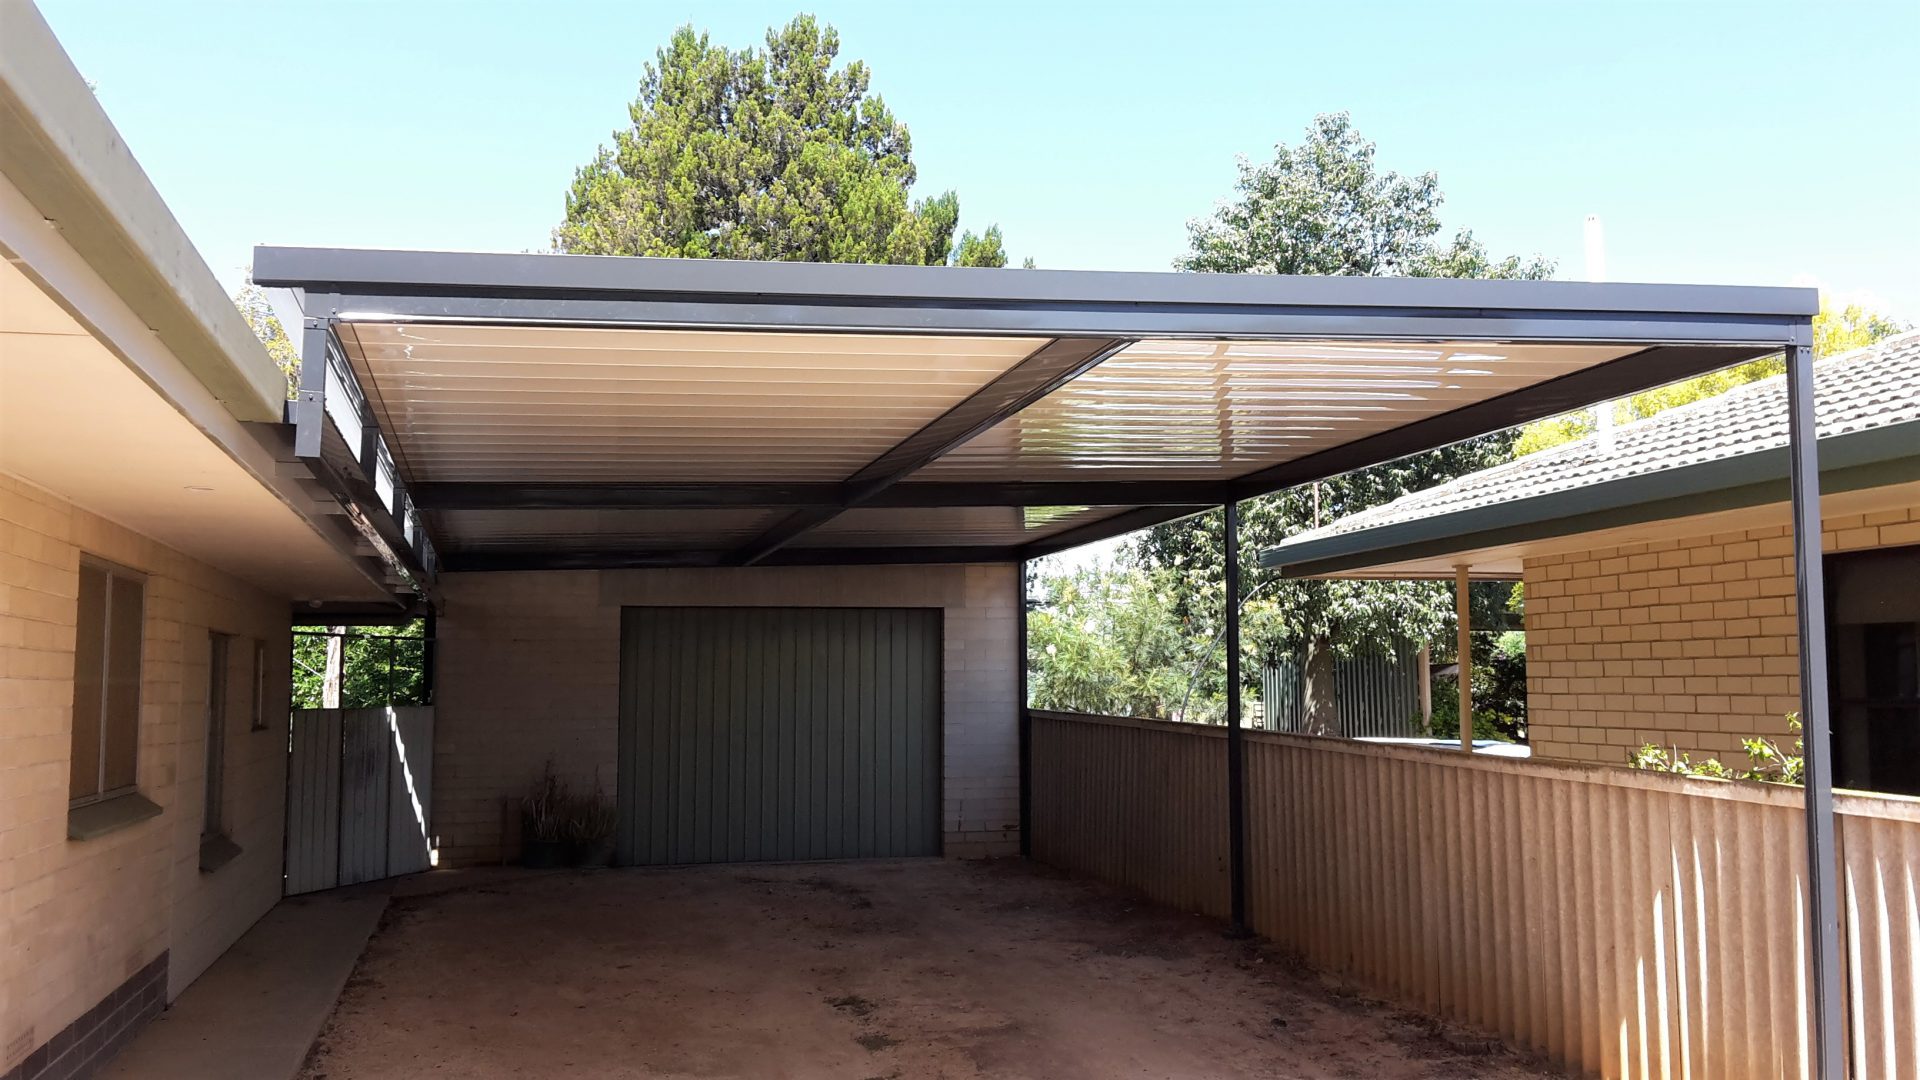 Carport Vs Garage: Which One Is Better For Your Car?